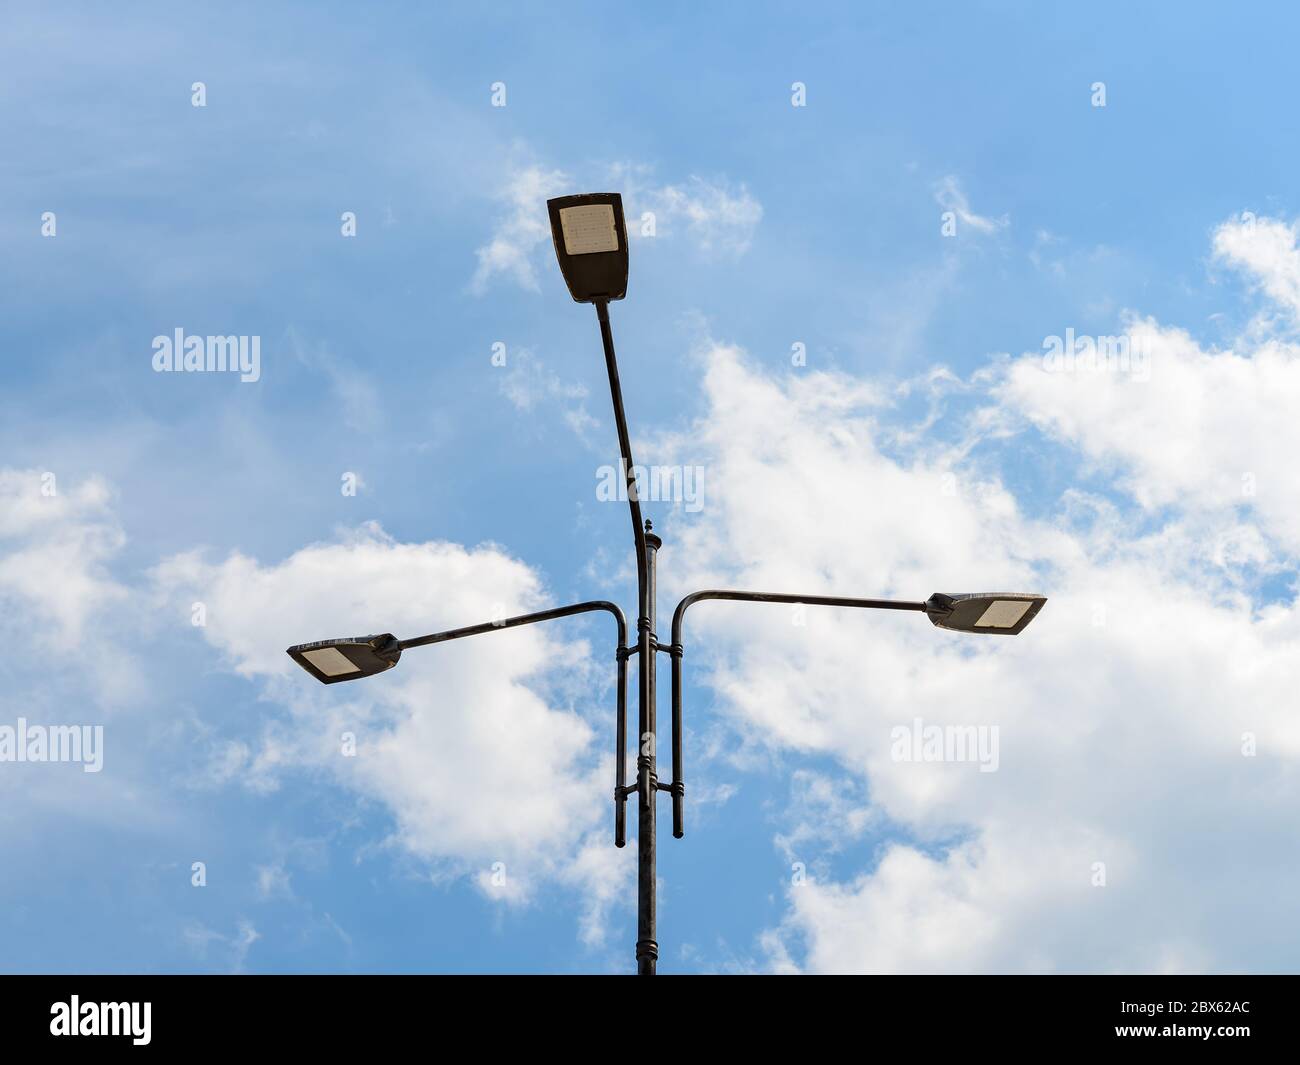 Are Street Lights, Street Lamps, and Pole Lights the Same